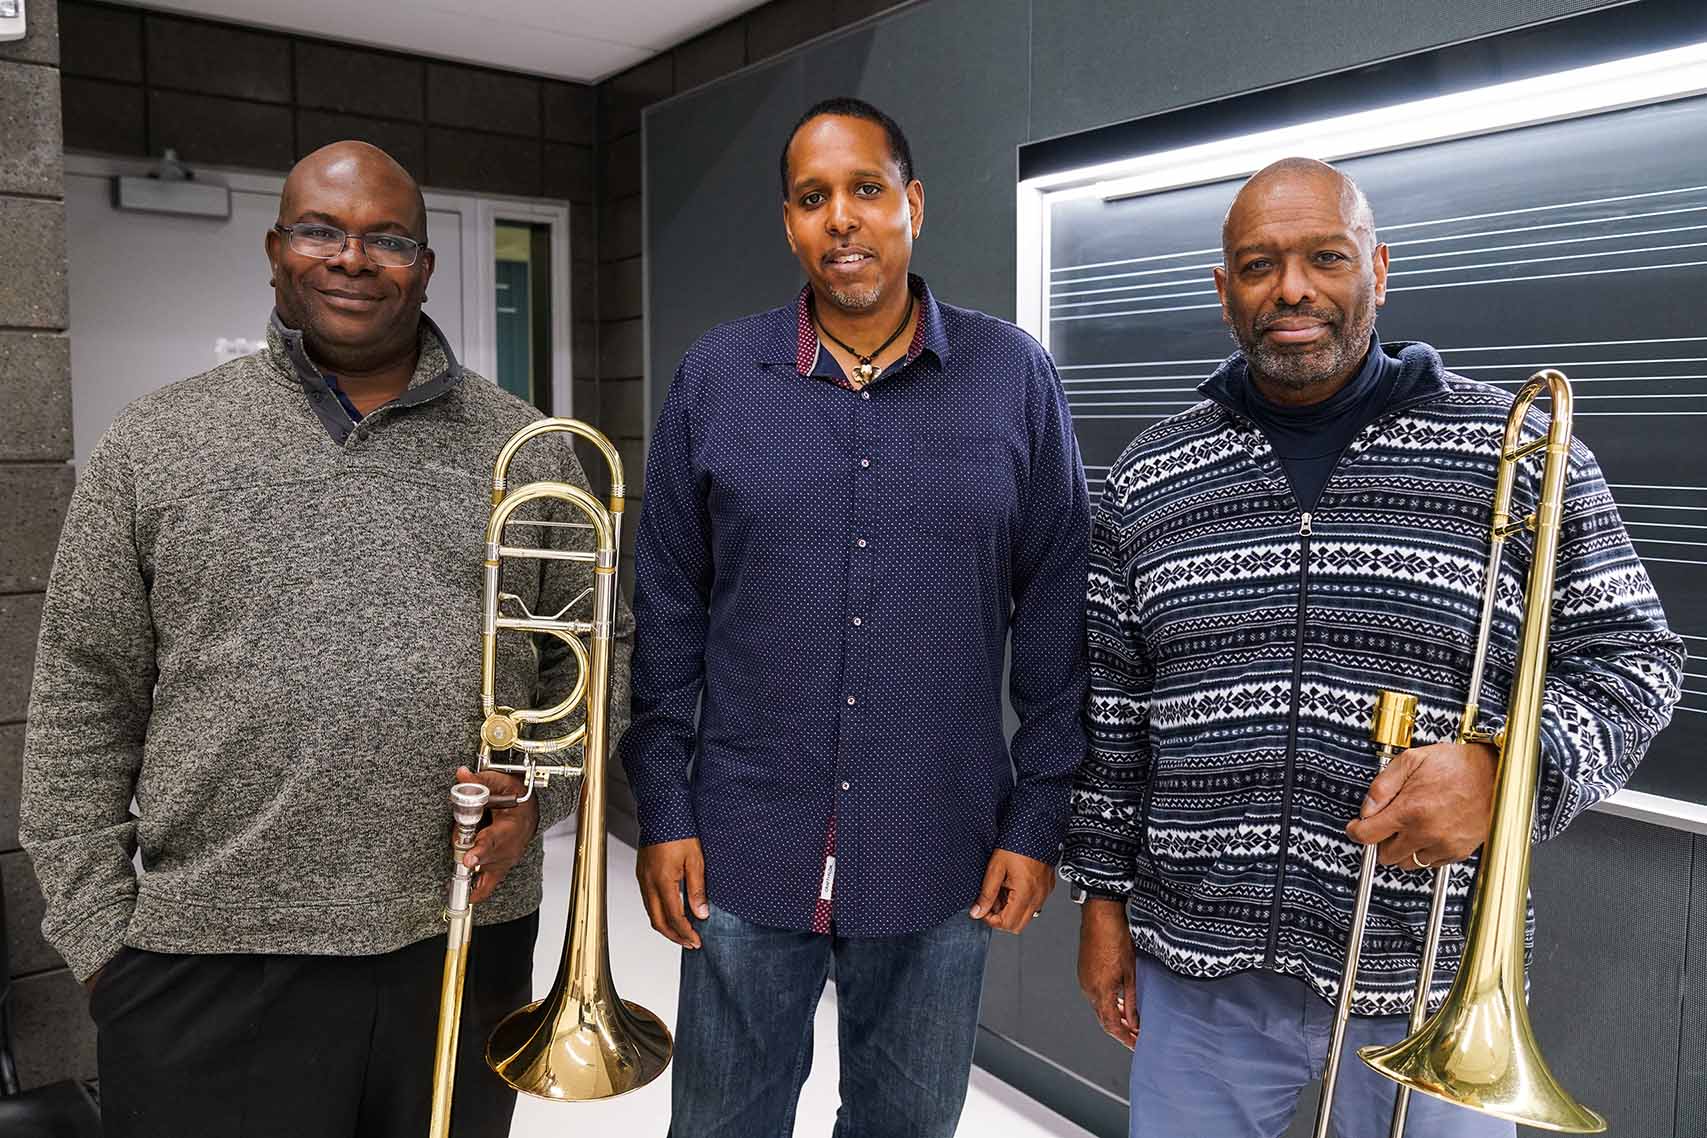 All three trombonists pose standing, Wilson and Jackson hold their trombones